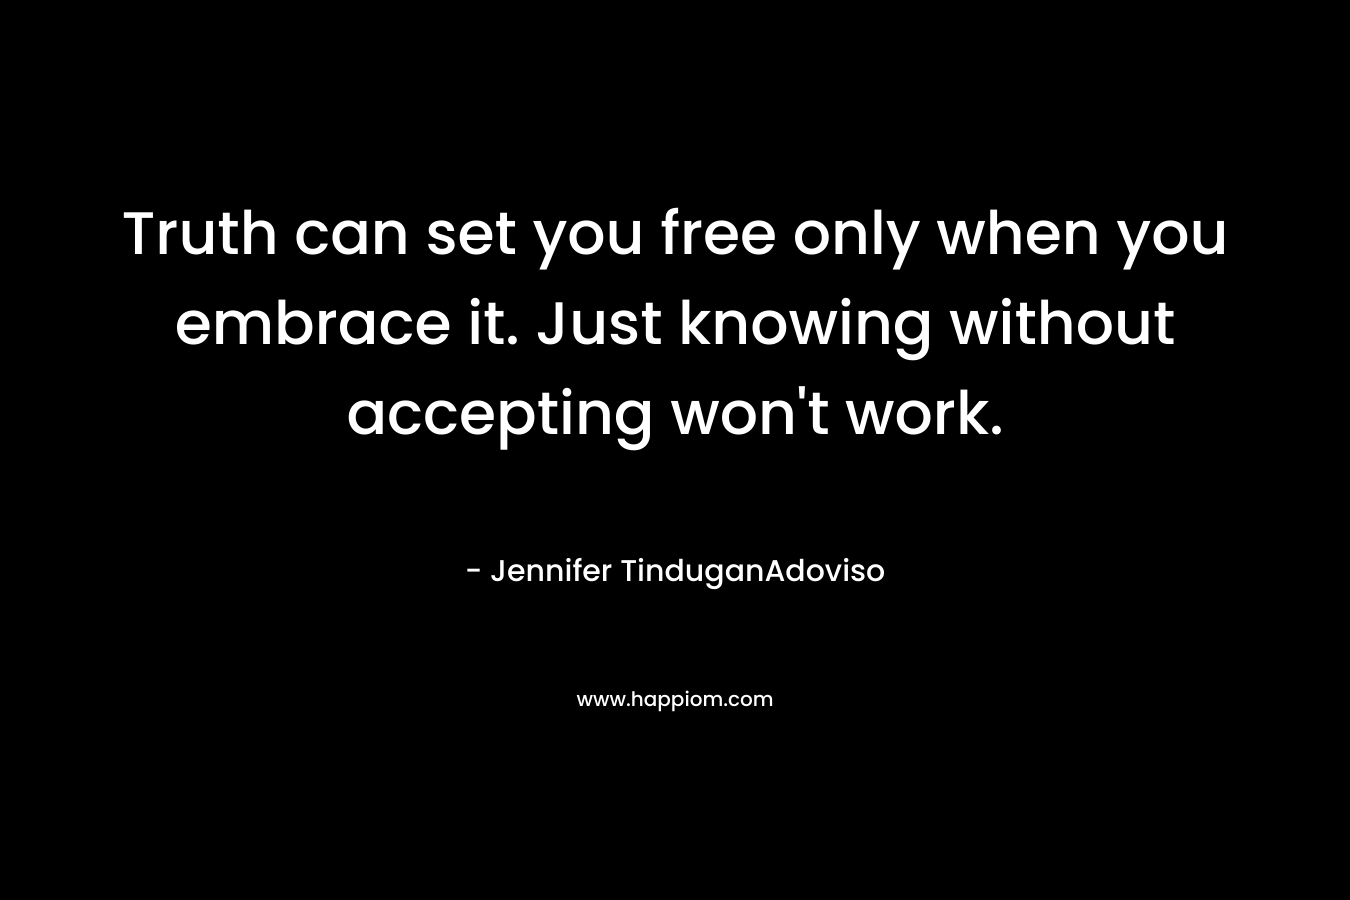 Truth can set you free only when you embrace it. Just knowing without accepting won’t work. – Jennifer TinduganAdoviso